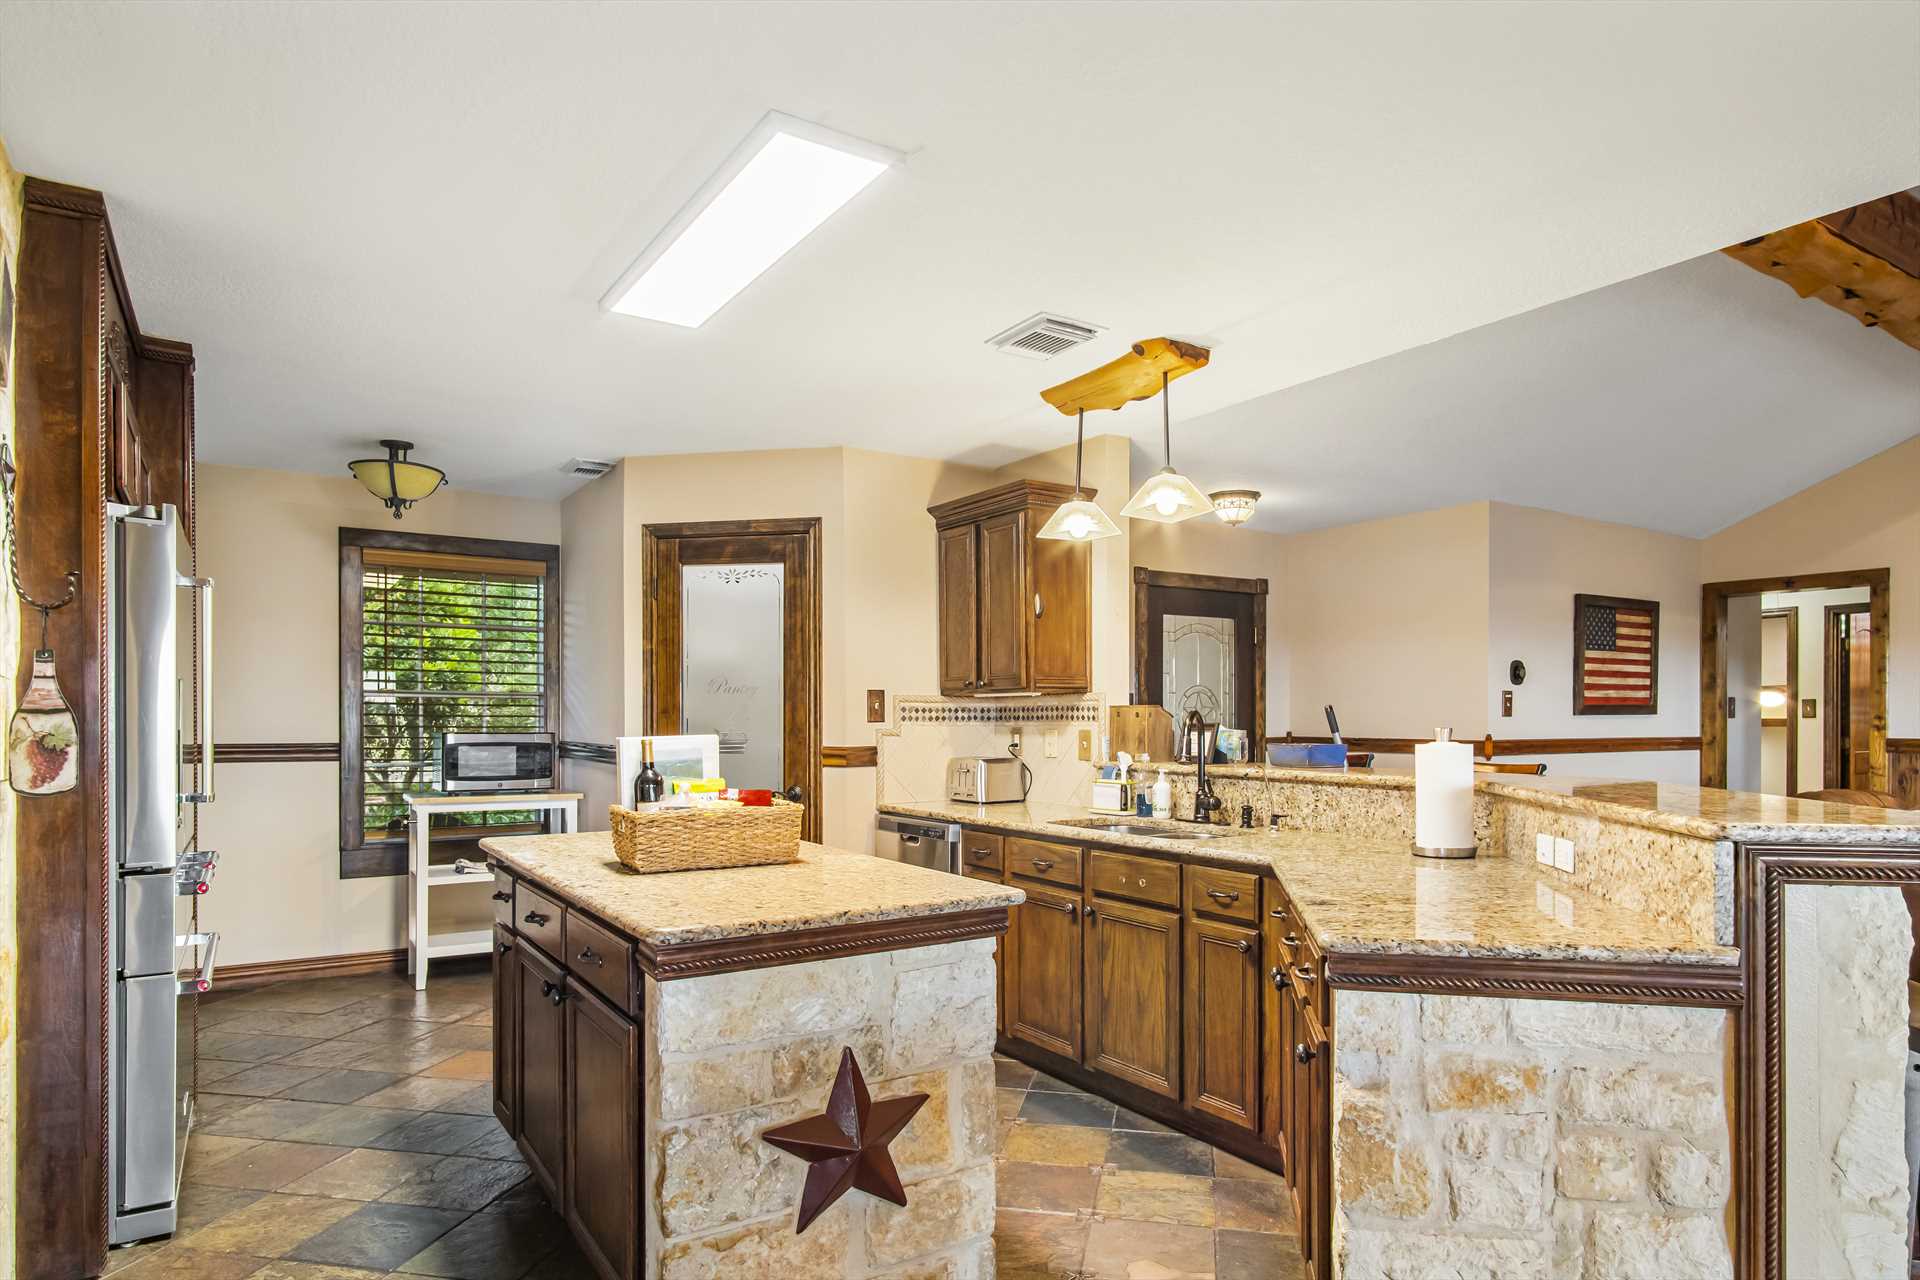                                                 Modern appliances and plenty of counter space make the kitchen a cook's paradise!